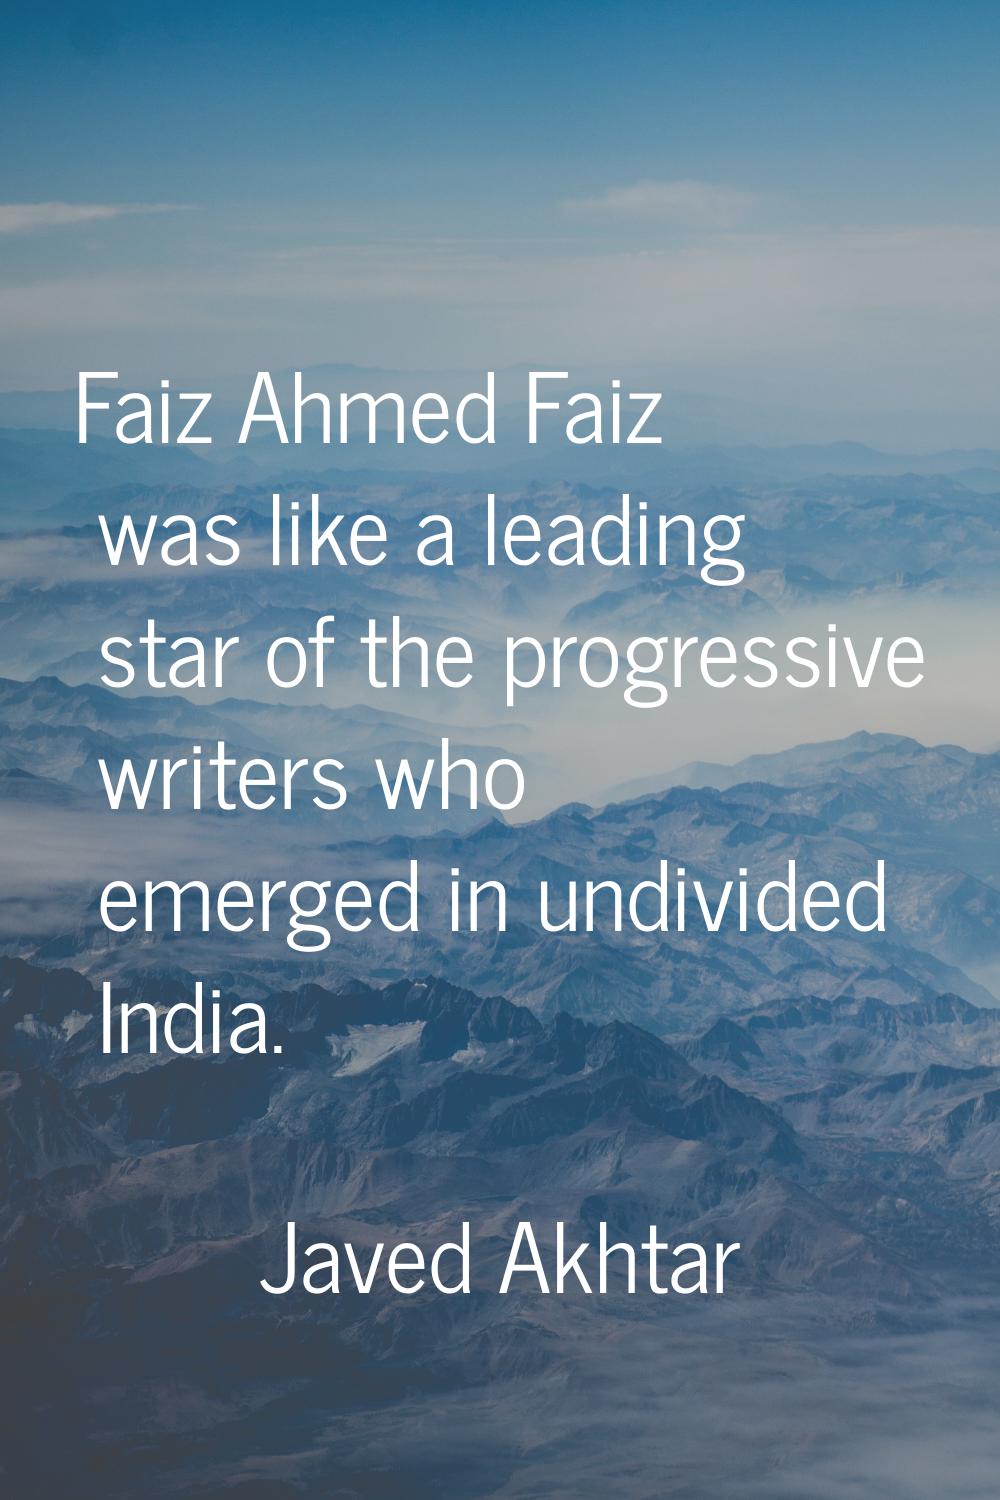 Faiz Ahmed Faiz was like a leading star of the progressive writers who emerged in undivided India.